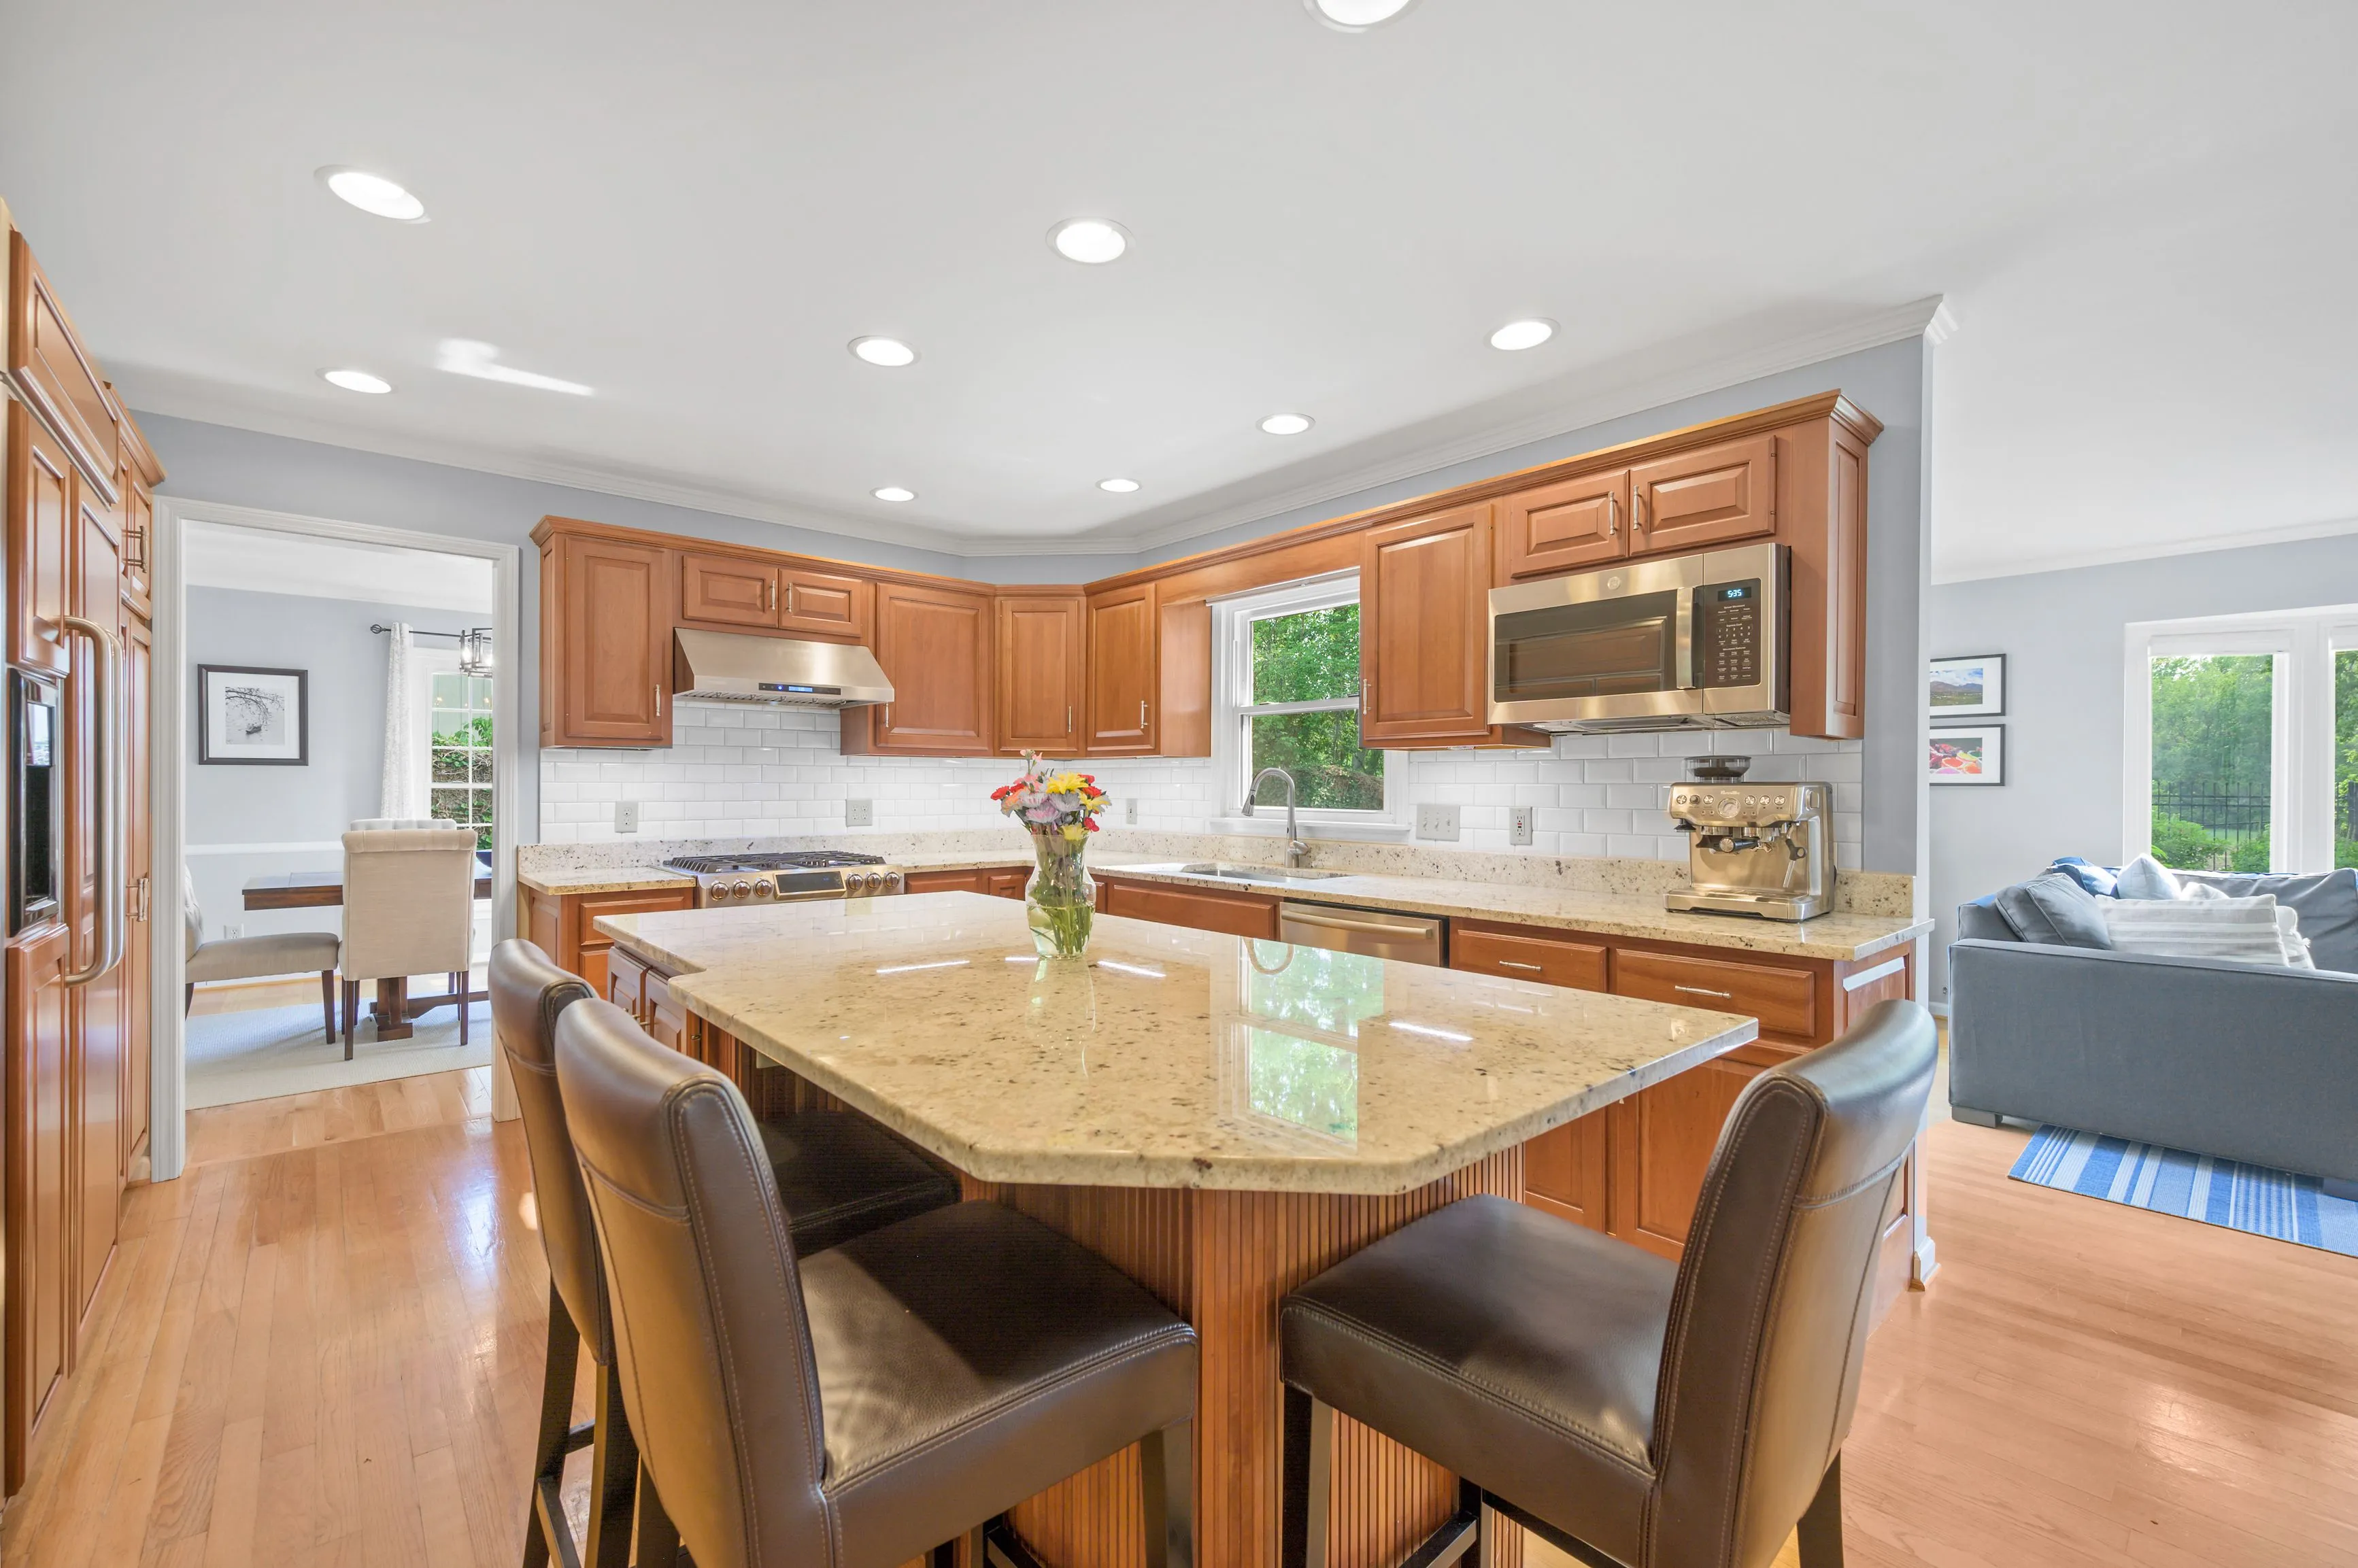 Spacious kitchen interior with wood cabinetry, granite countertops, and modern appliances, connected to a bright dining area with a glass door leading to the outside.